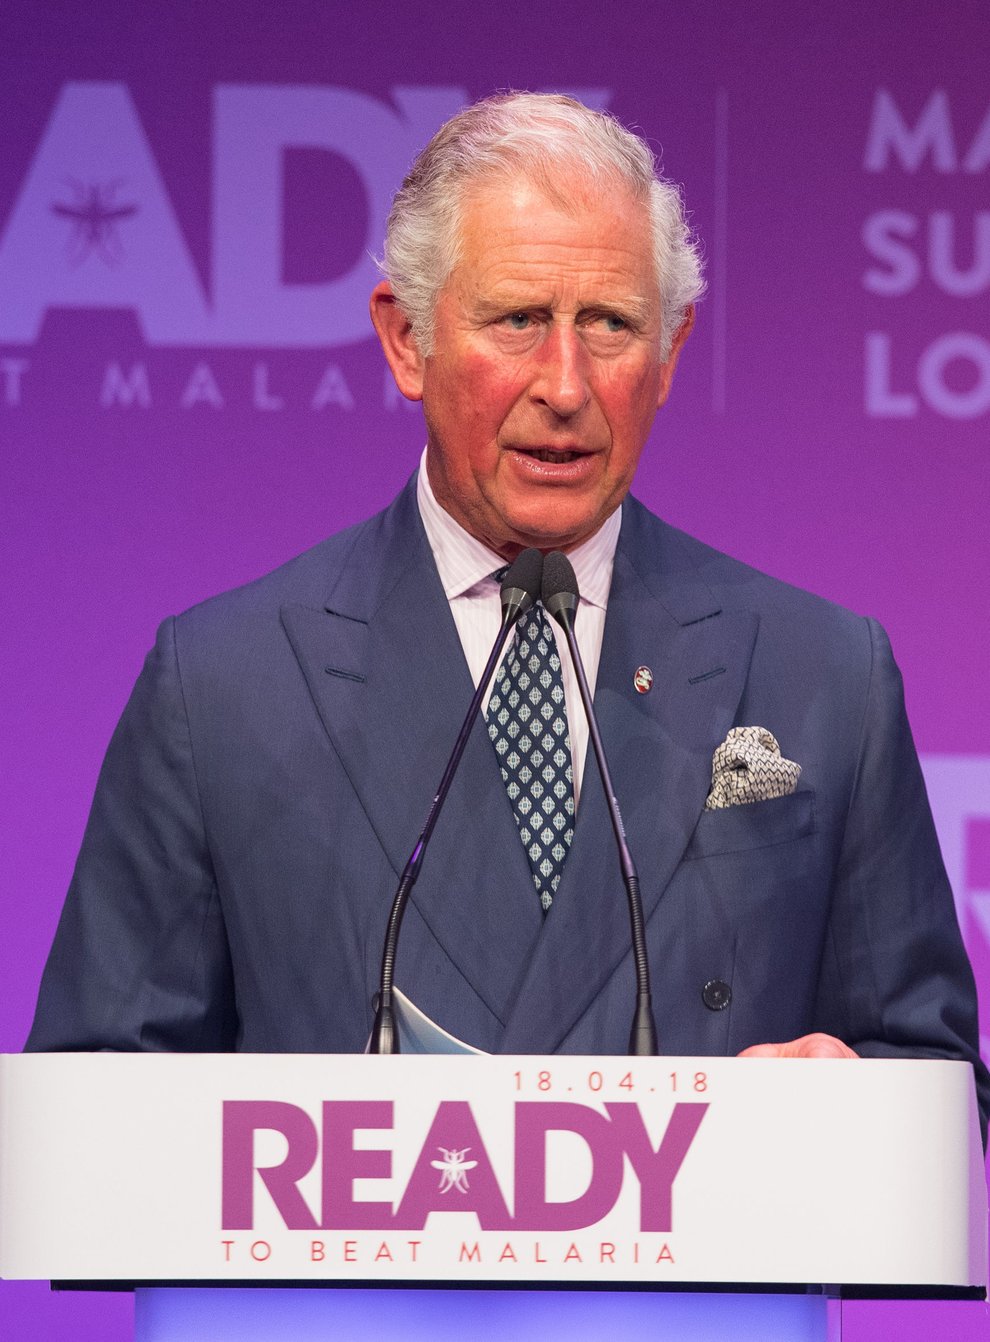 The Prince of Wales speaking at the Malaria Summit in 2018